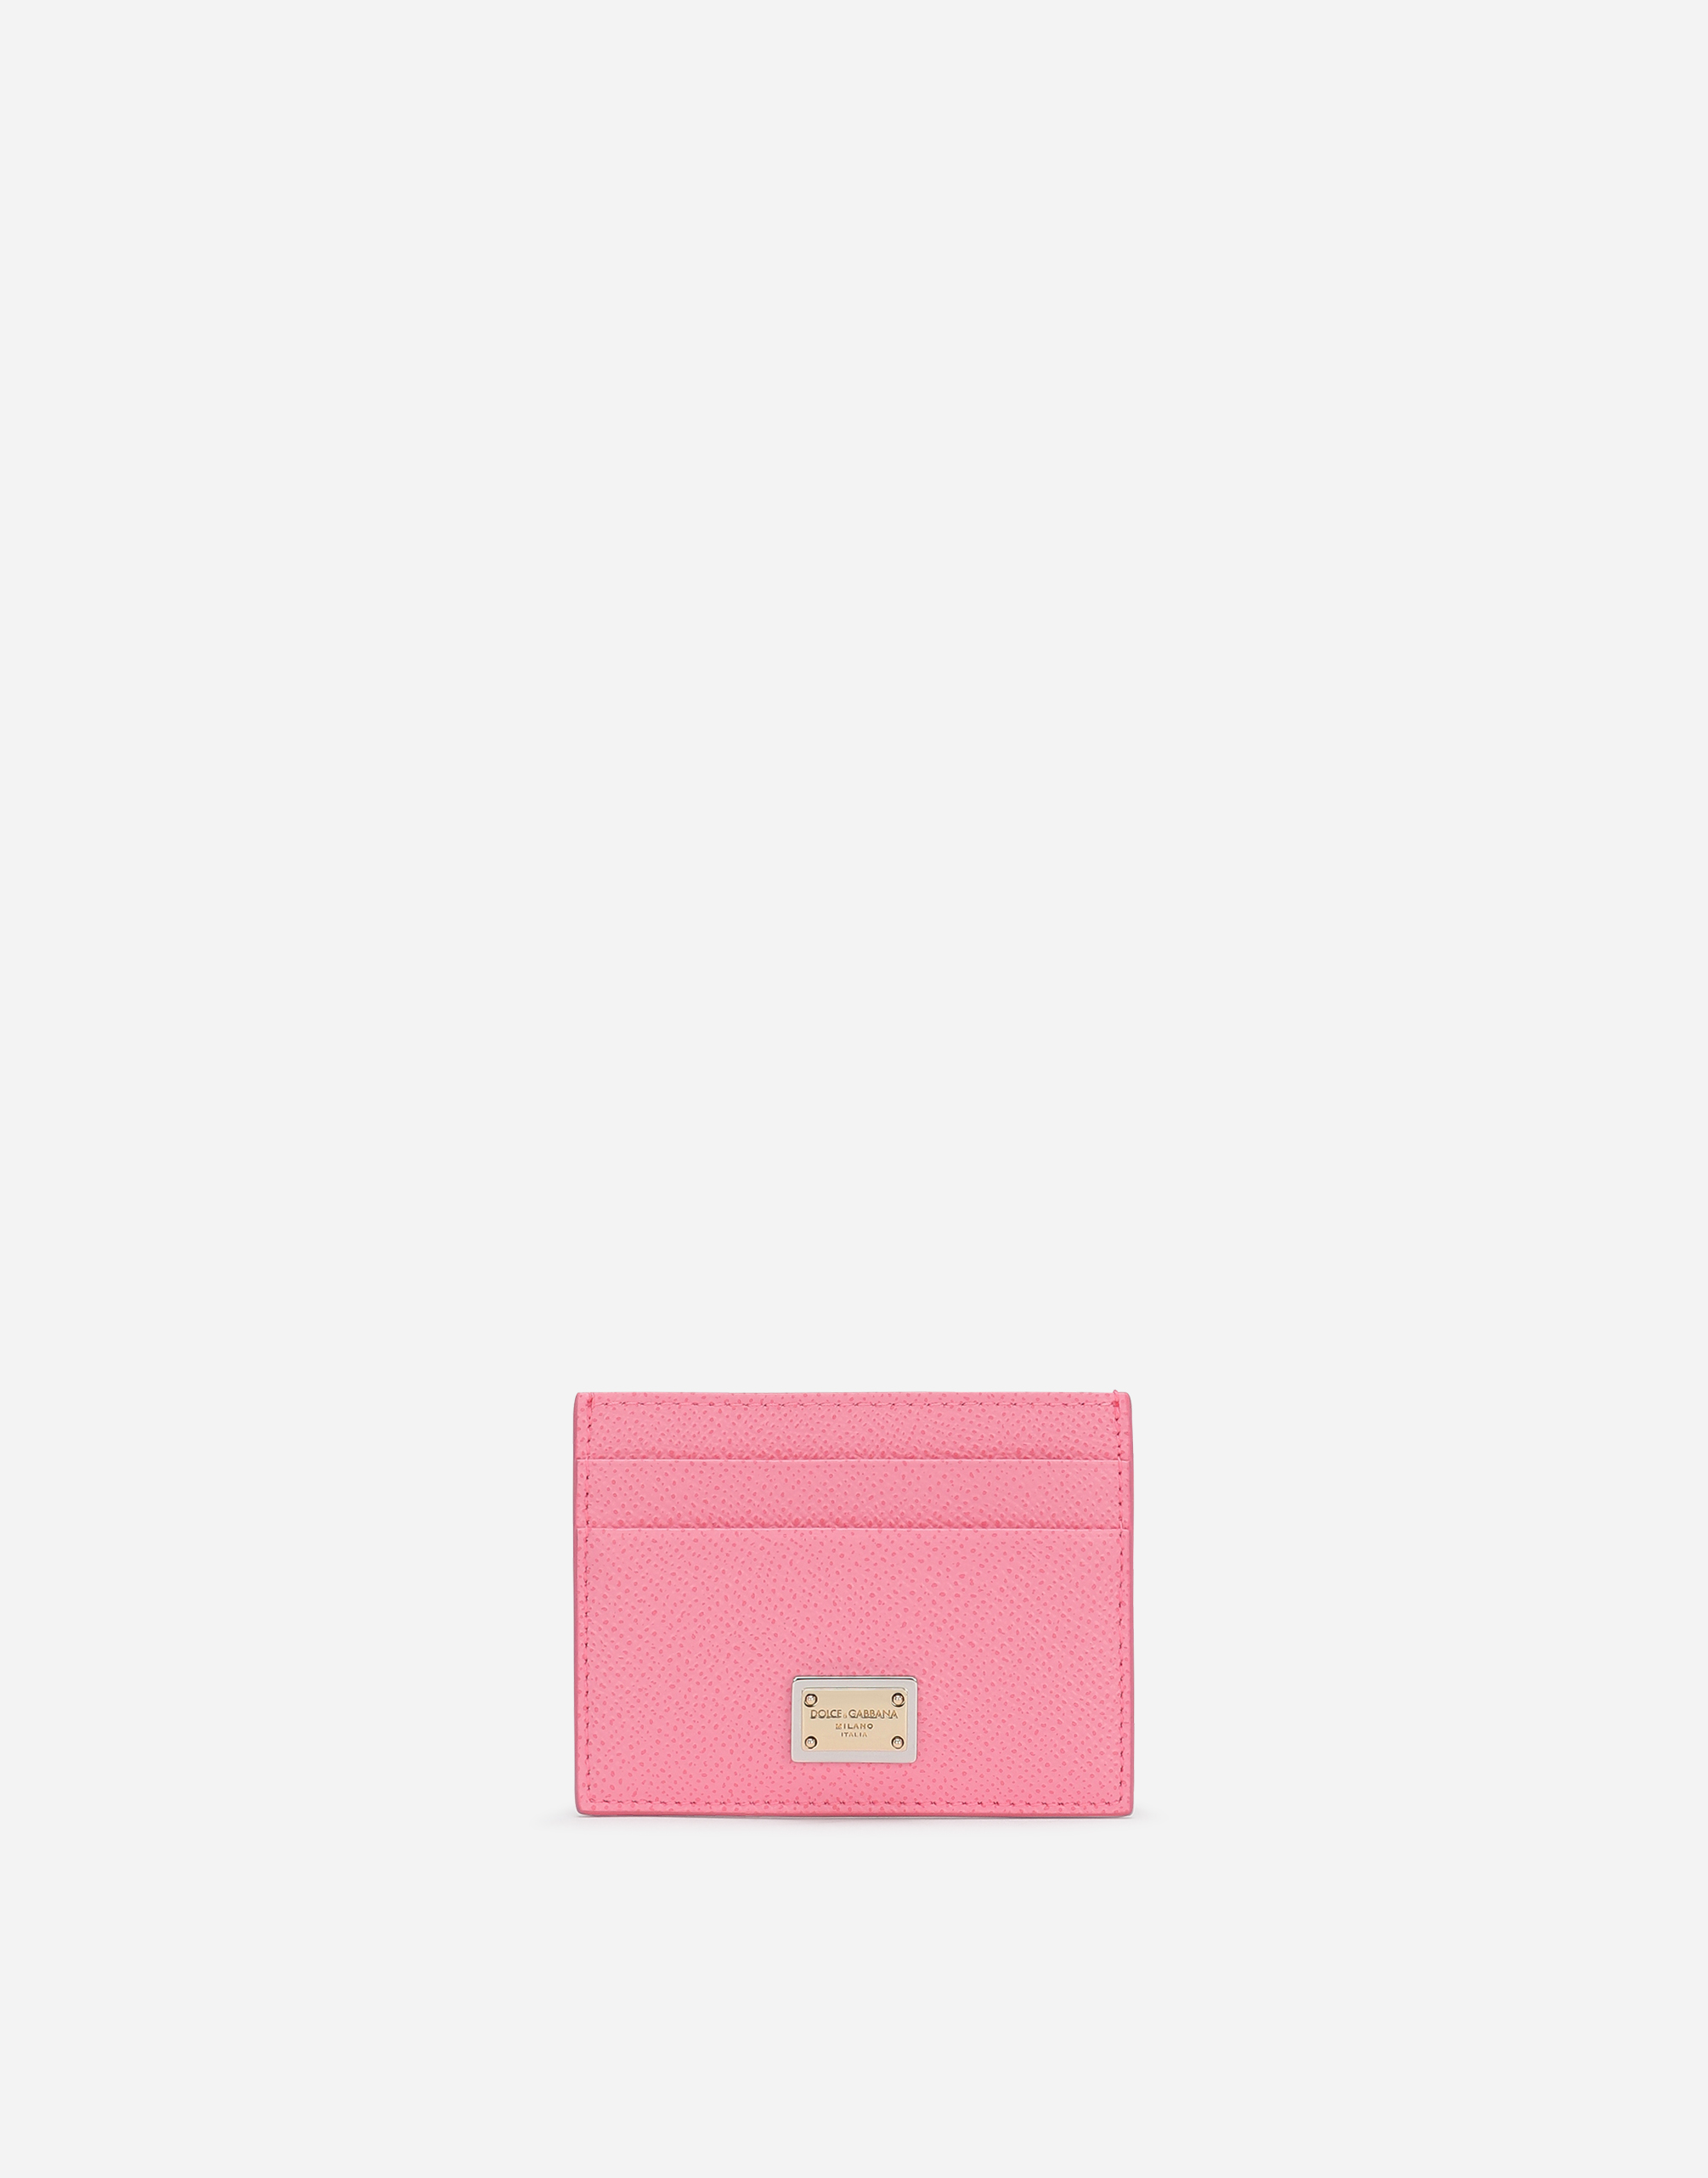 Dolce & Gabbana Dauphine Calfskin Card Holder With Branded Tag In Pink